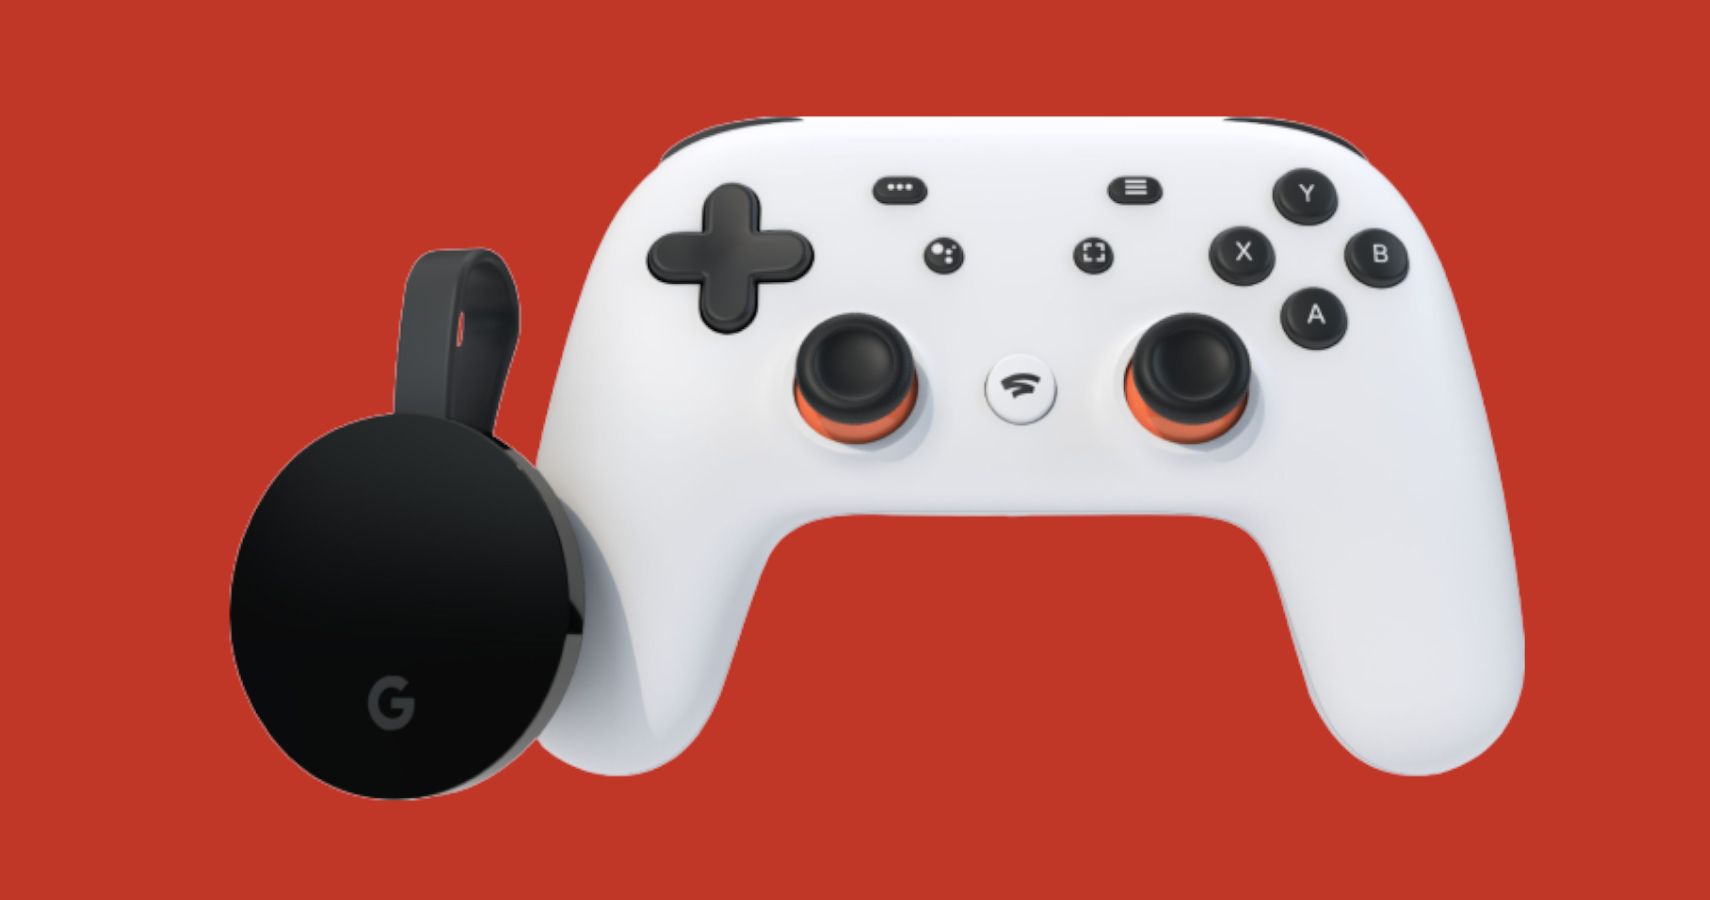 Google Stadia Premiere Edition Clearly White Chromecast